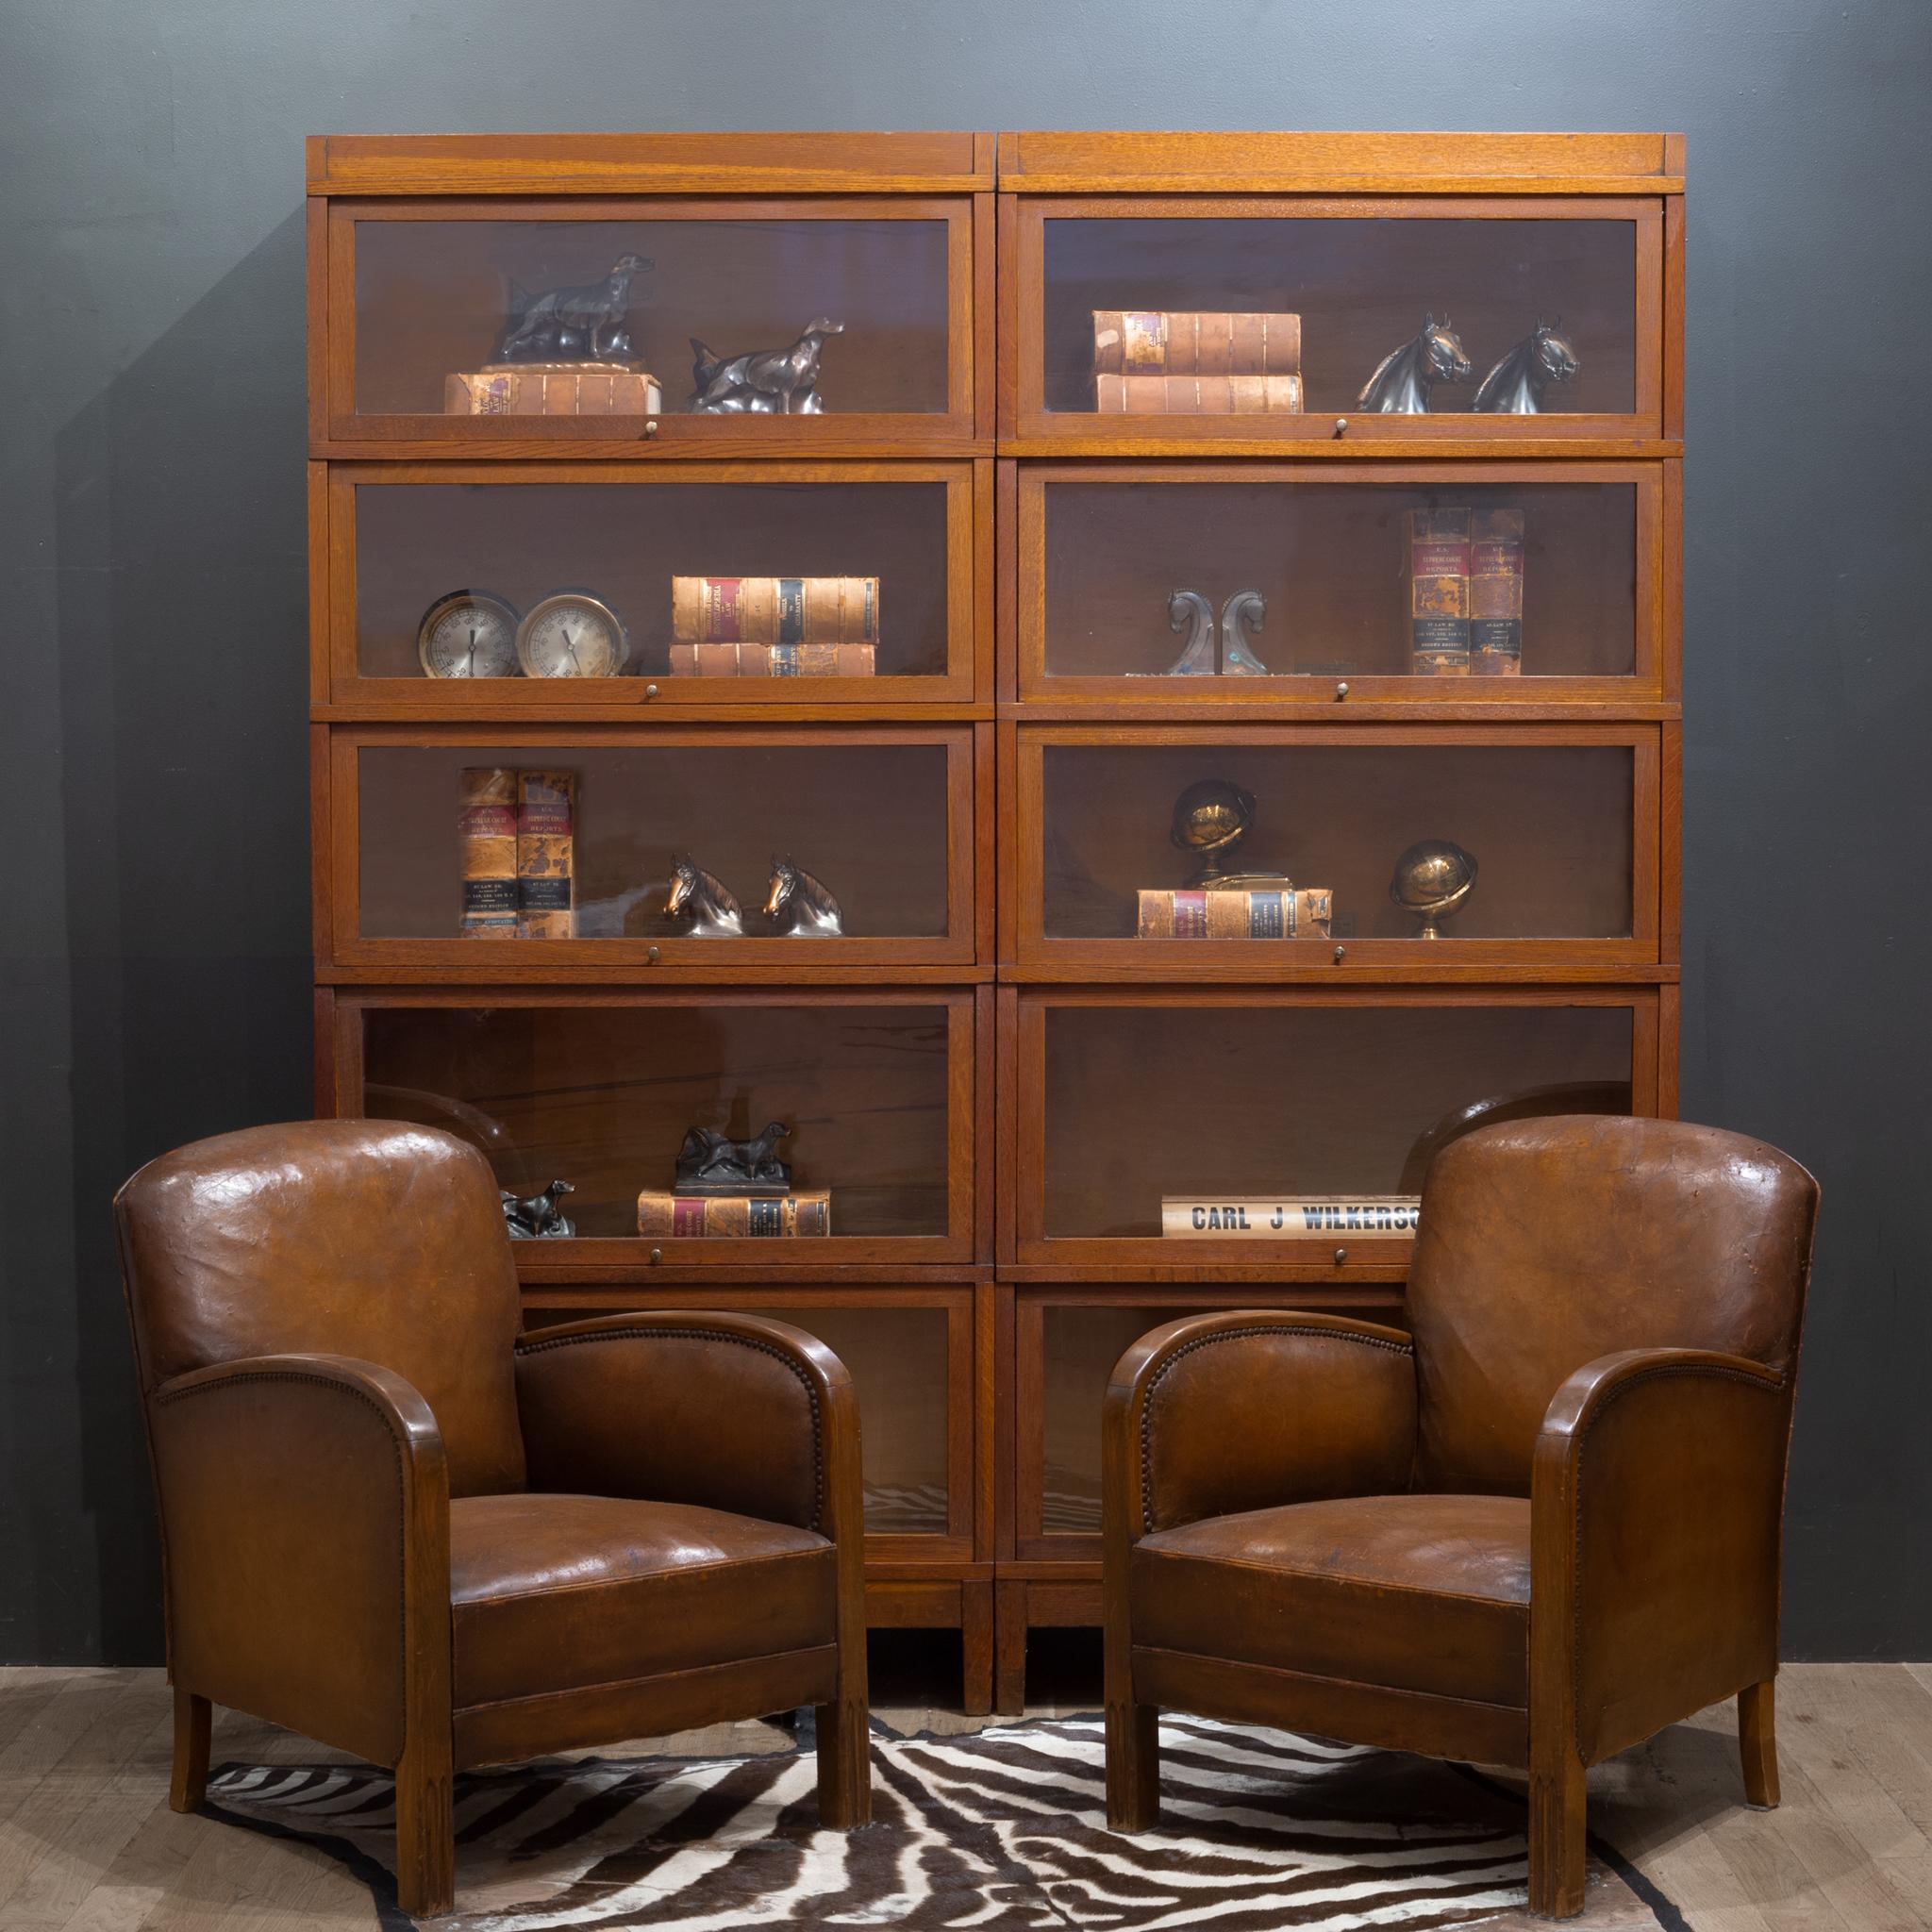 About

Price is per bookcase.

Original matching early 20th century modular 5 stack oak lawyer's bookcases with brass knobs and glass doors that open and slide in from the top. Each bookcase is modular consisting of 7 pieces: the top, the bottom and